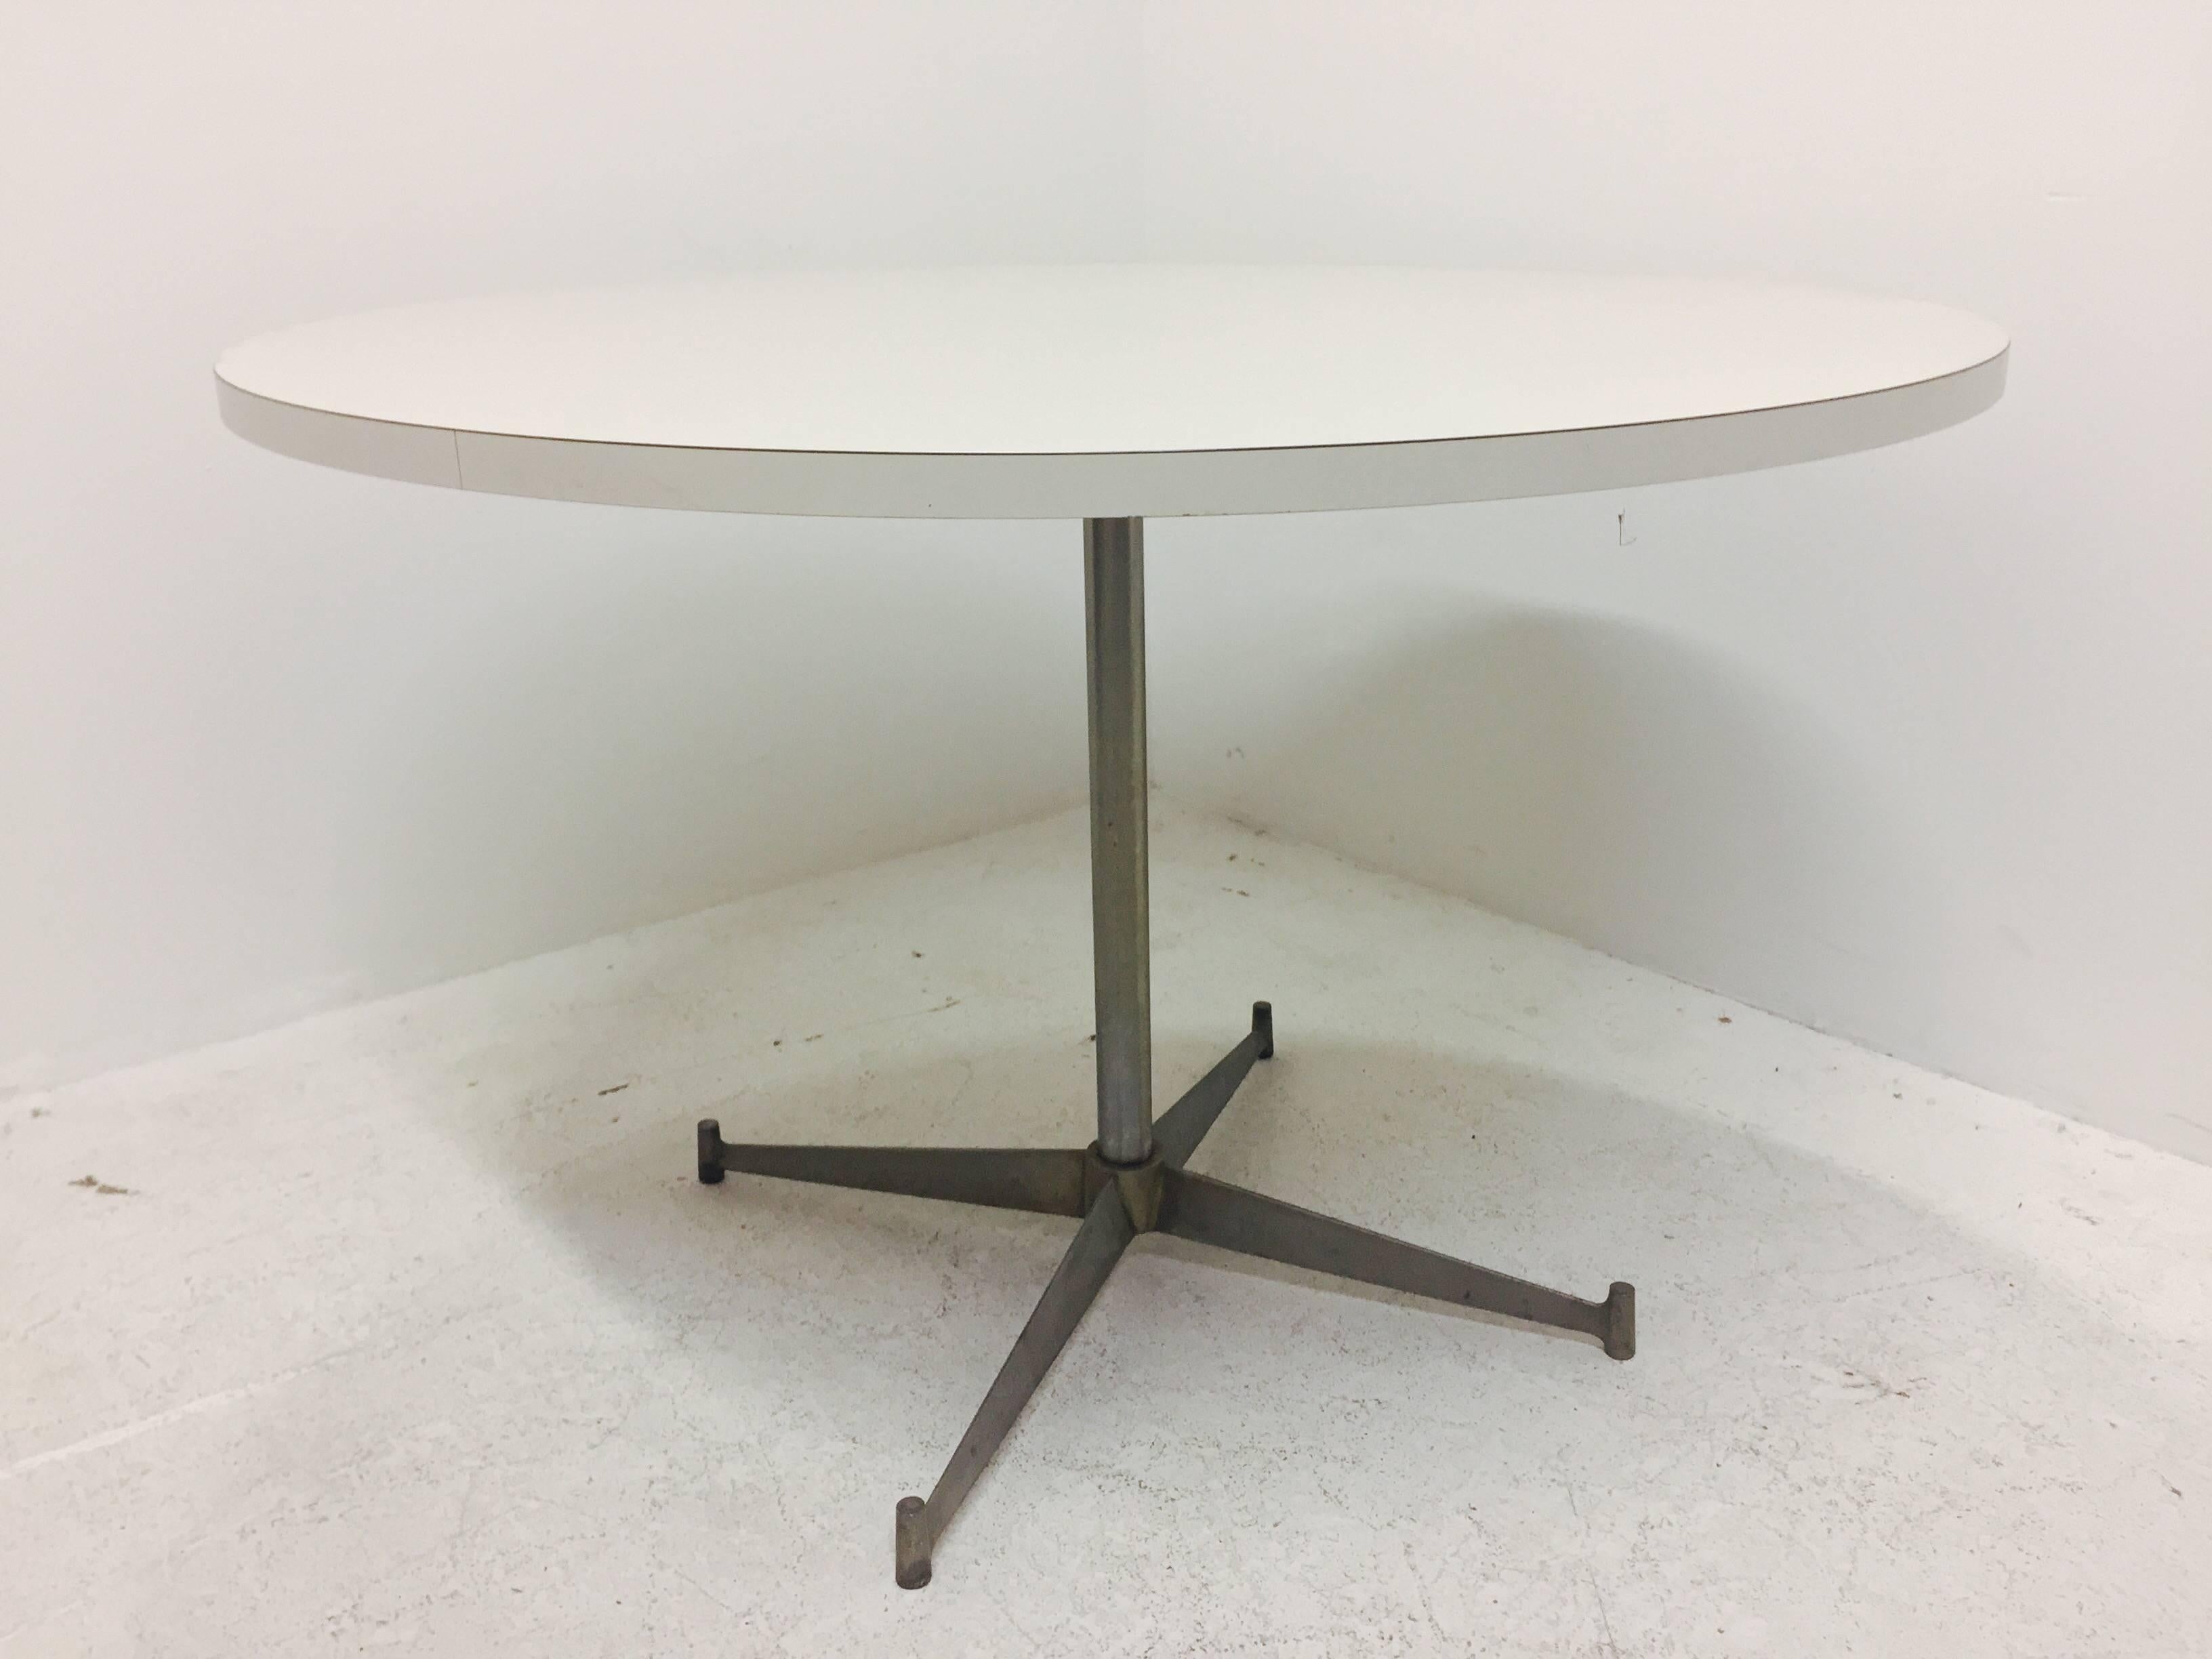 Light gray laminate 42" round dining table by Paul McCobb for Directional with aluminum base. Base shows wear from use and age. Seem is visible on ban that surround tabletop, circa 1950s.

Dimensions: 42"dia x 28" T.